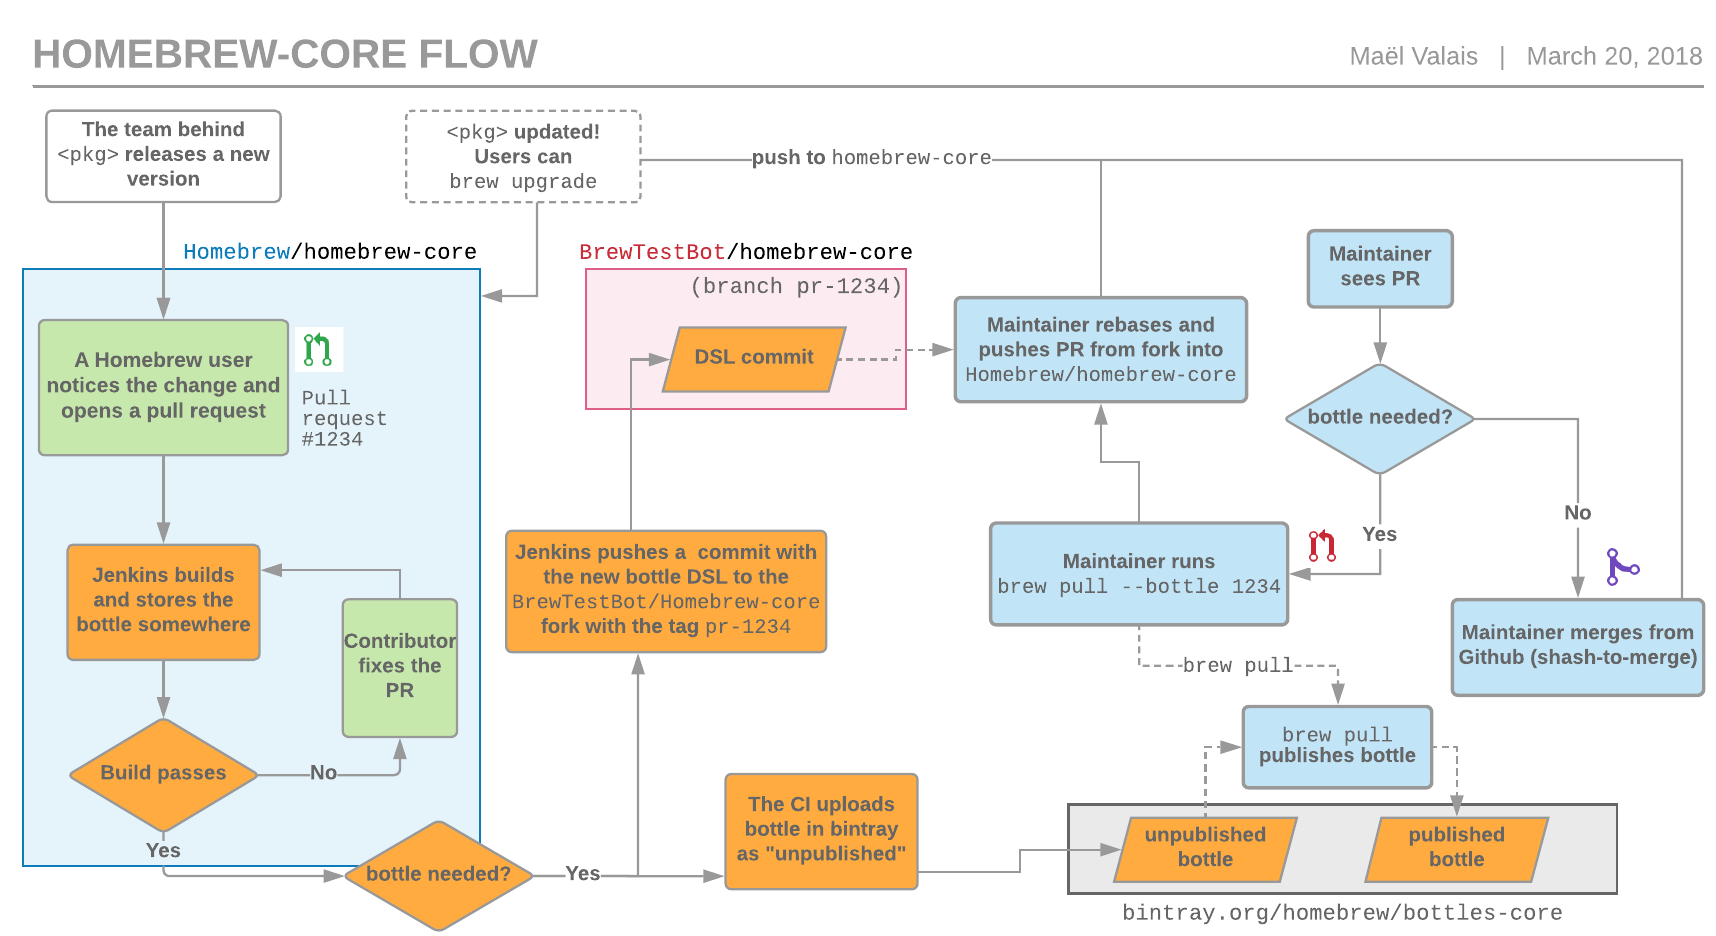 A flow chart showing the Homebrew/homebrew-core workflow for building binary packages (bottles). It is very complicated.